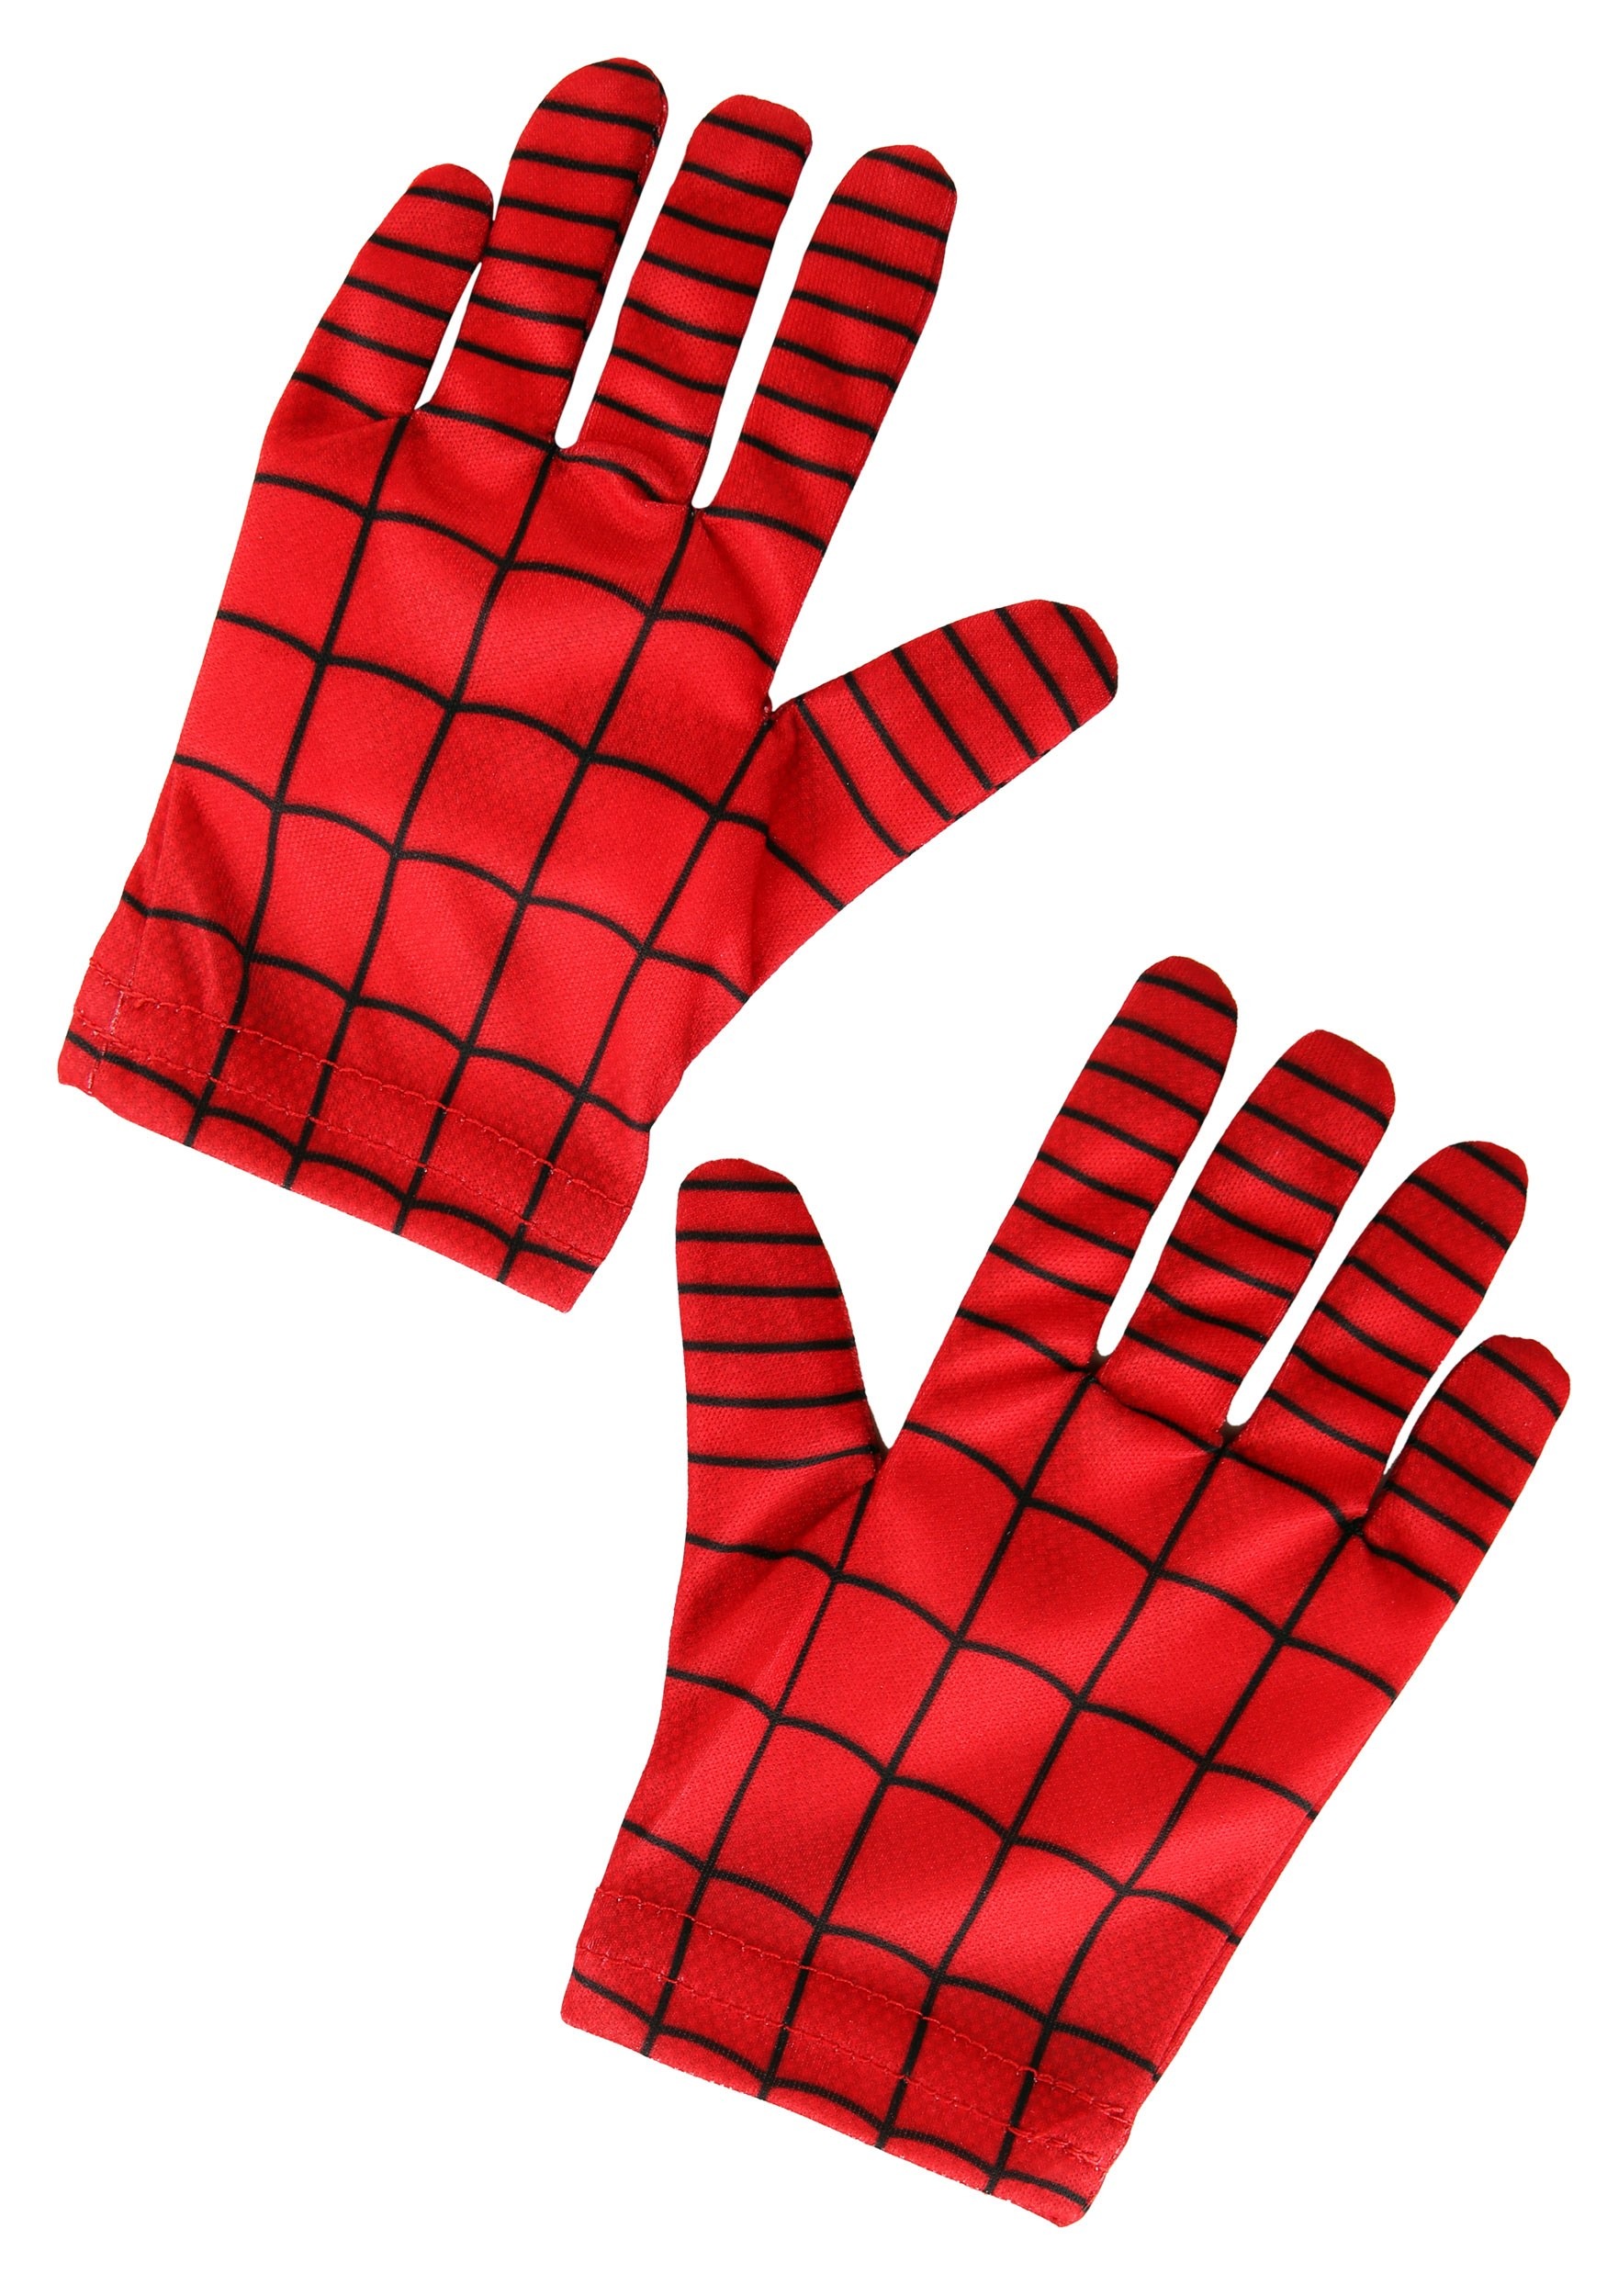 Spider-man Gloves for Toddlers